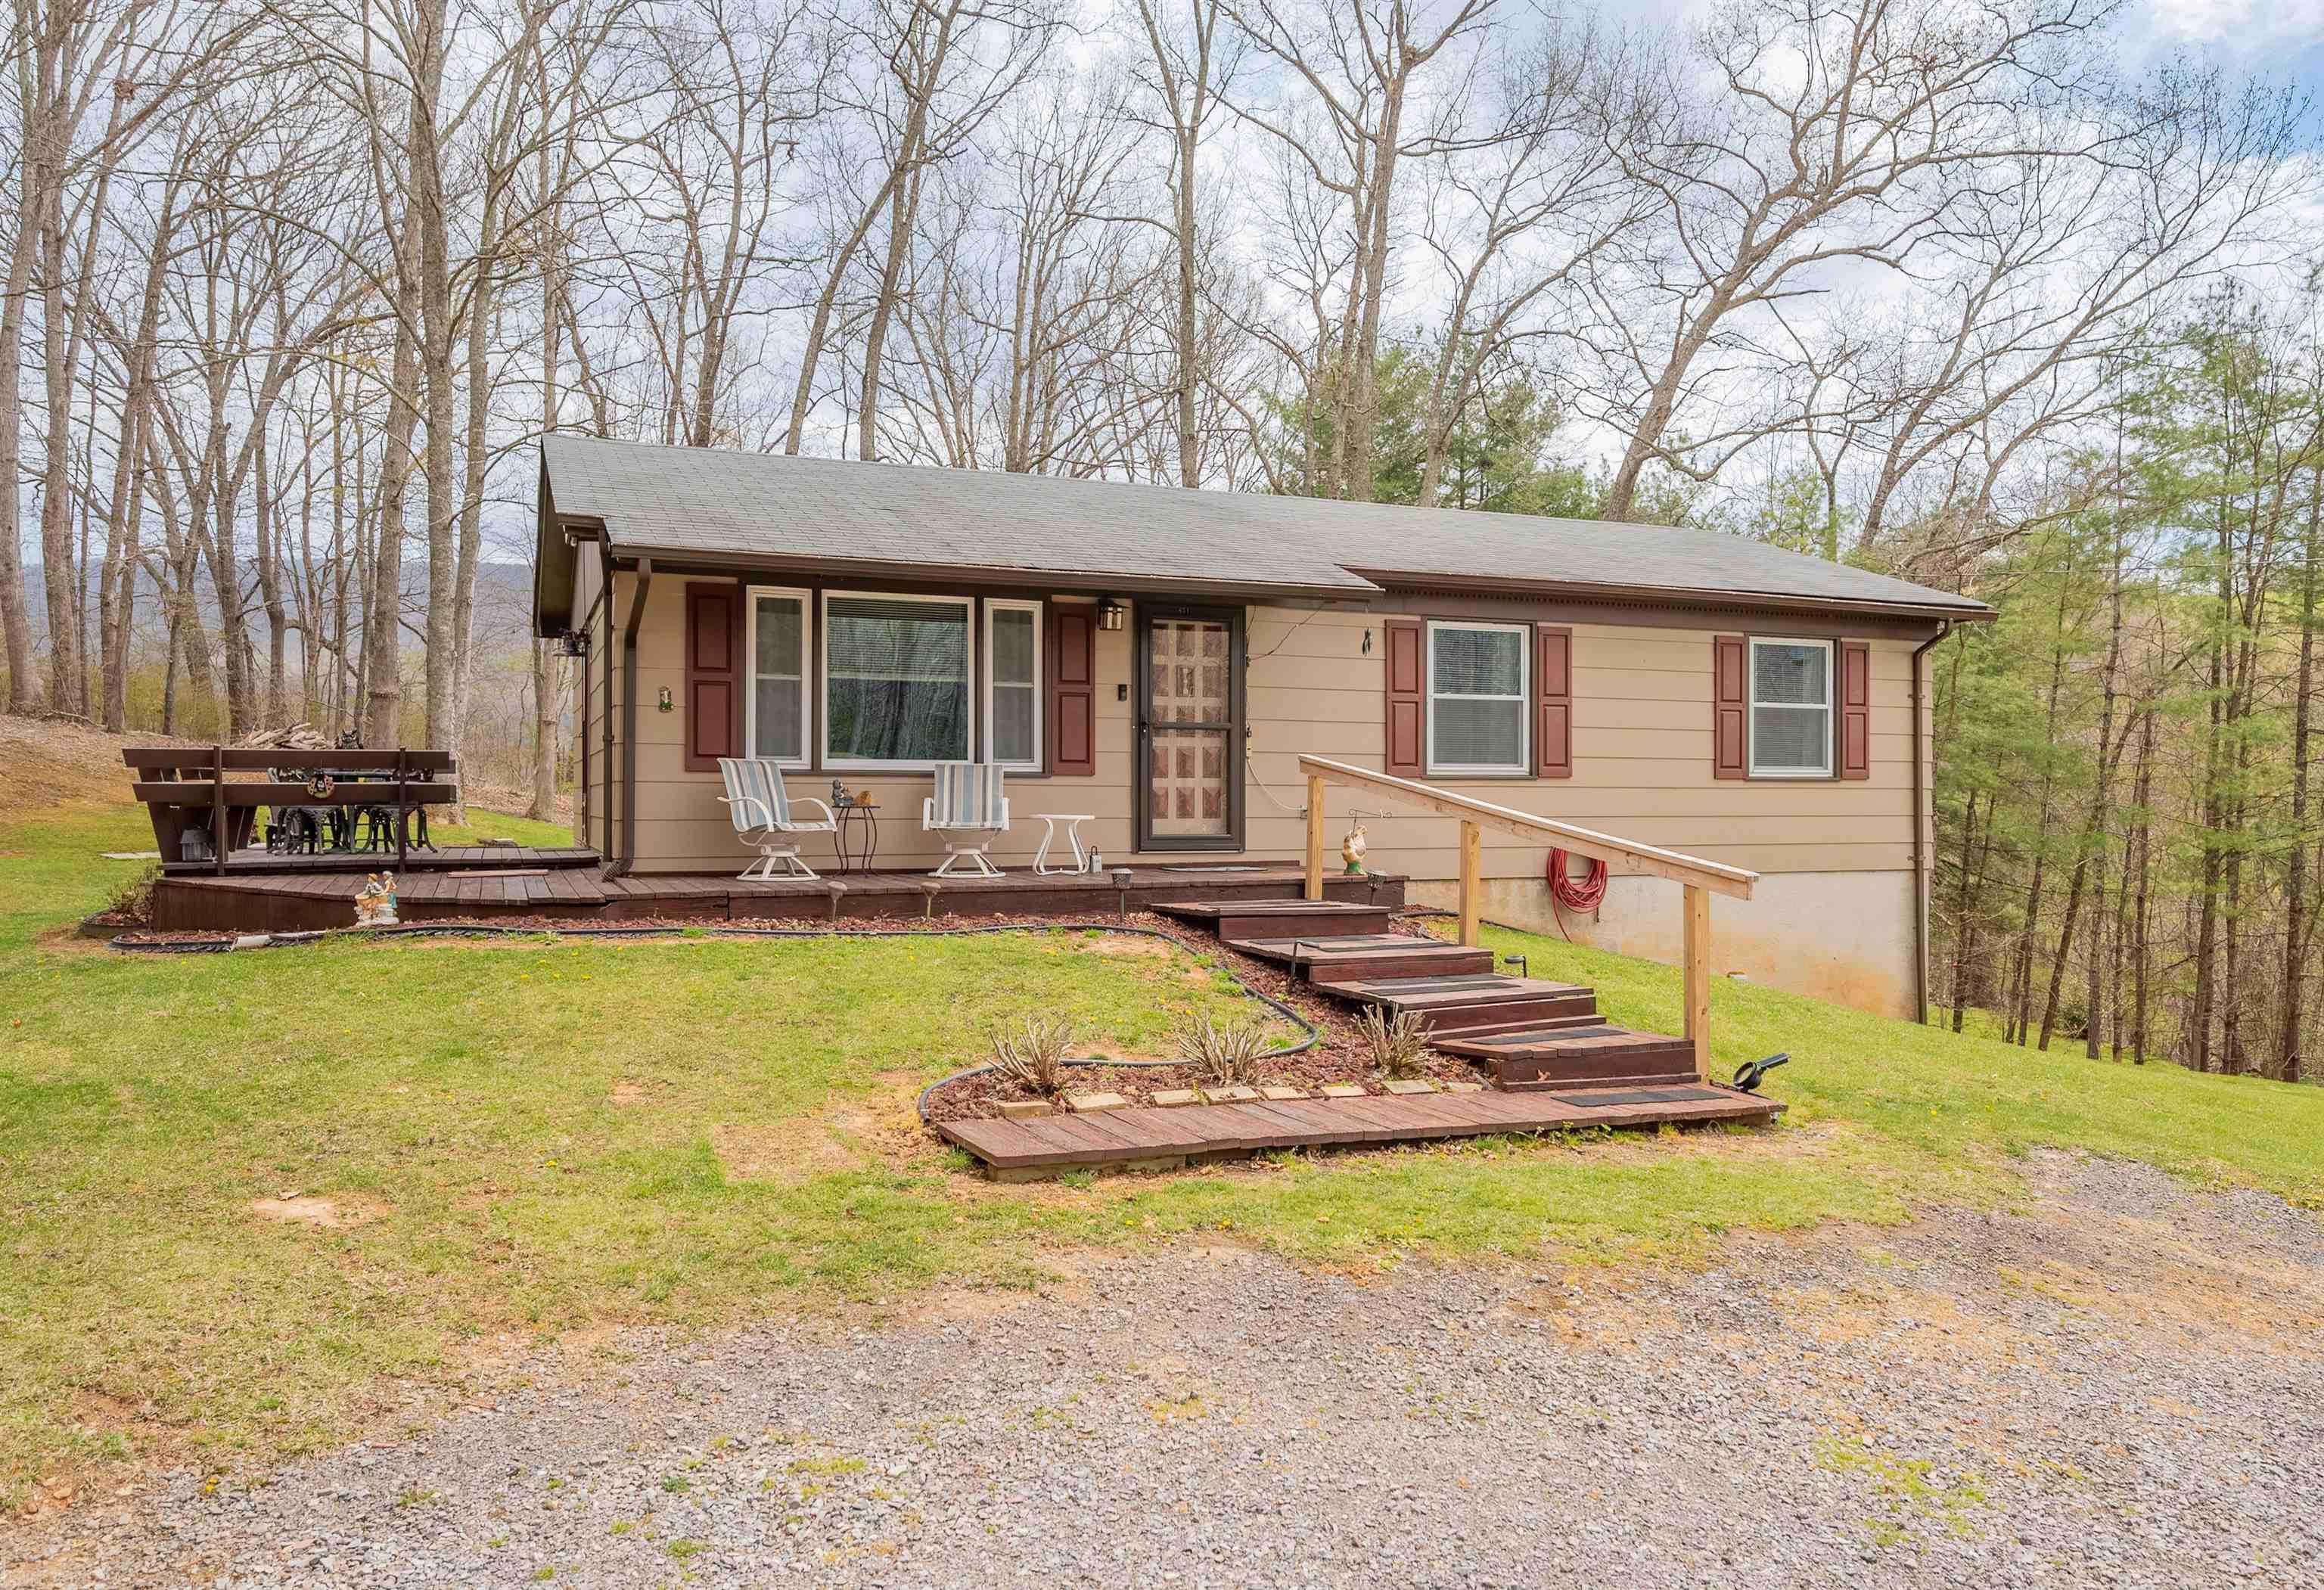 Enjoy a well maintained ranch home in a mountain retreat setting. 2.5 acres of well maintained yard with surrounding woods and creek. The 3 bedrooms are spacious and bathroom updated in recent years. Kitchen is very functional and basement offers almost the same foot print for storage or workshop area with walk out to back yard.